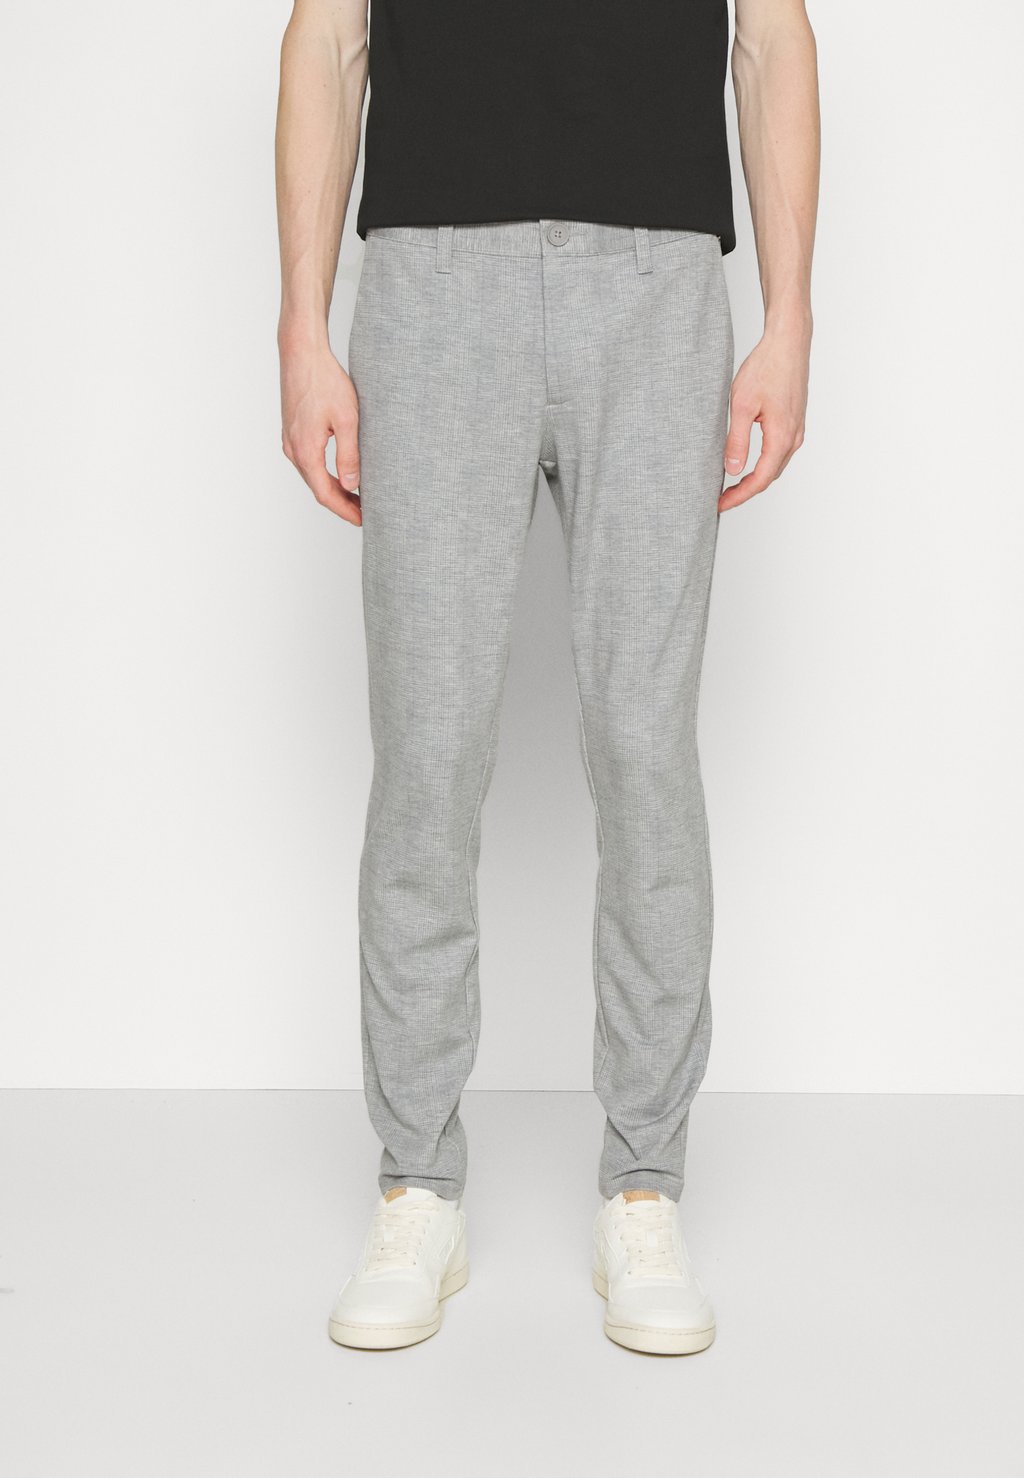 Брюки ONSMARK CHECK PANT Only & Sons, цвет light grey melange брюки onsmark pant only